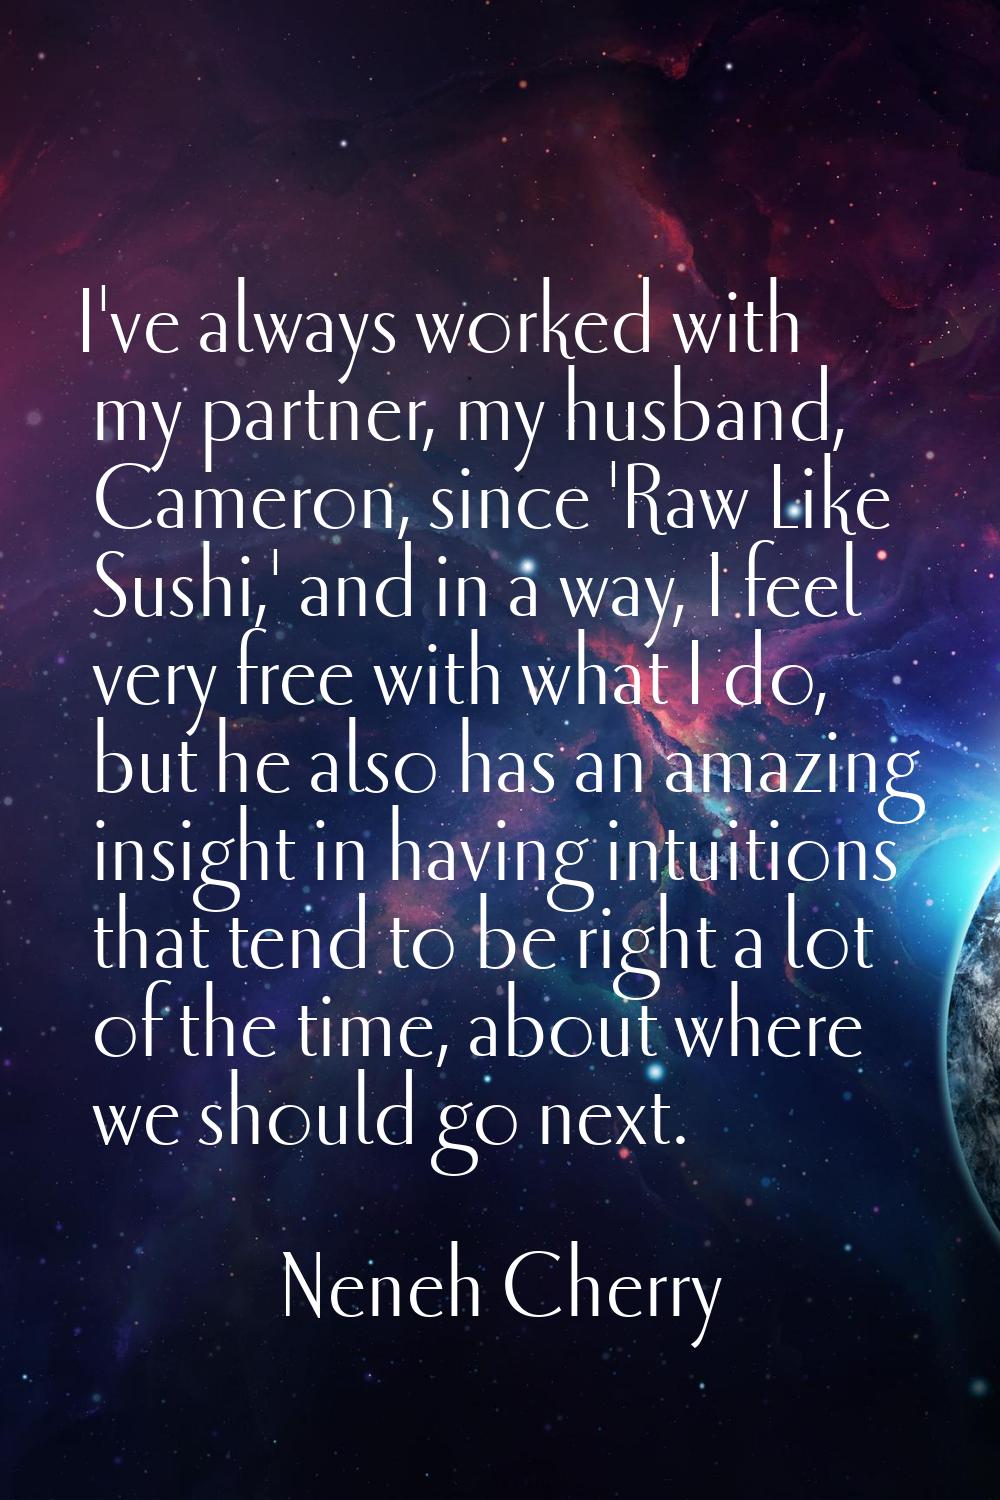 I've always worked with my partner, my husband, Cameron, since 'Raw Like Sushi,' and in a way, I fe